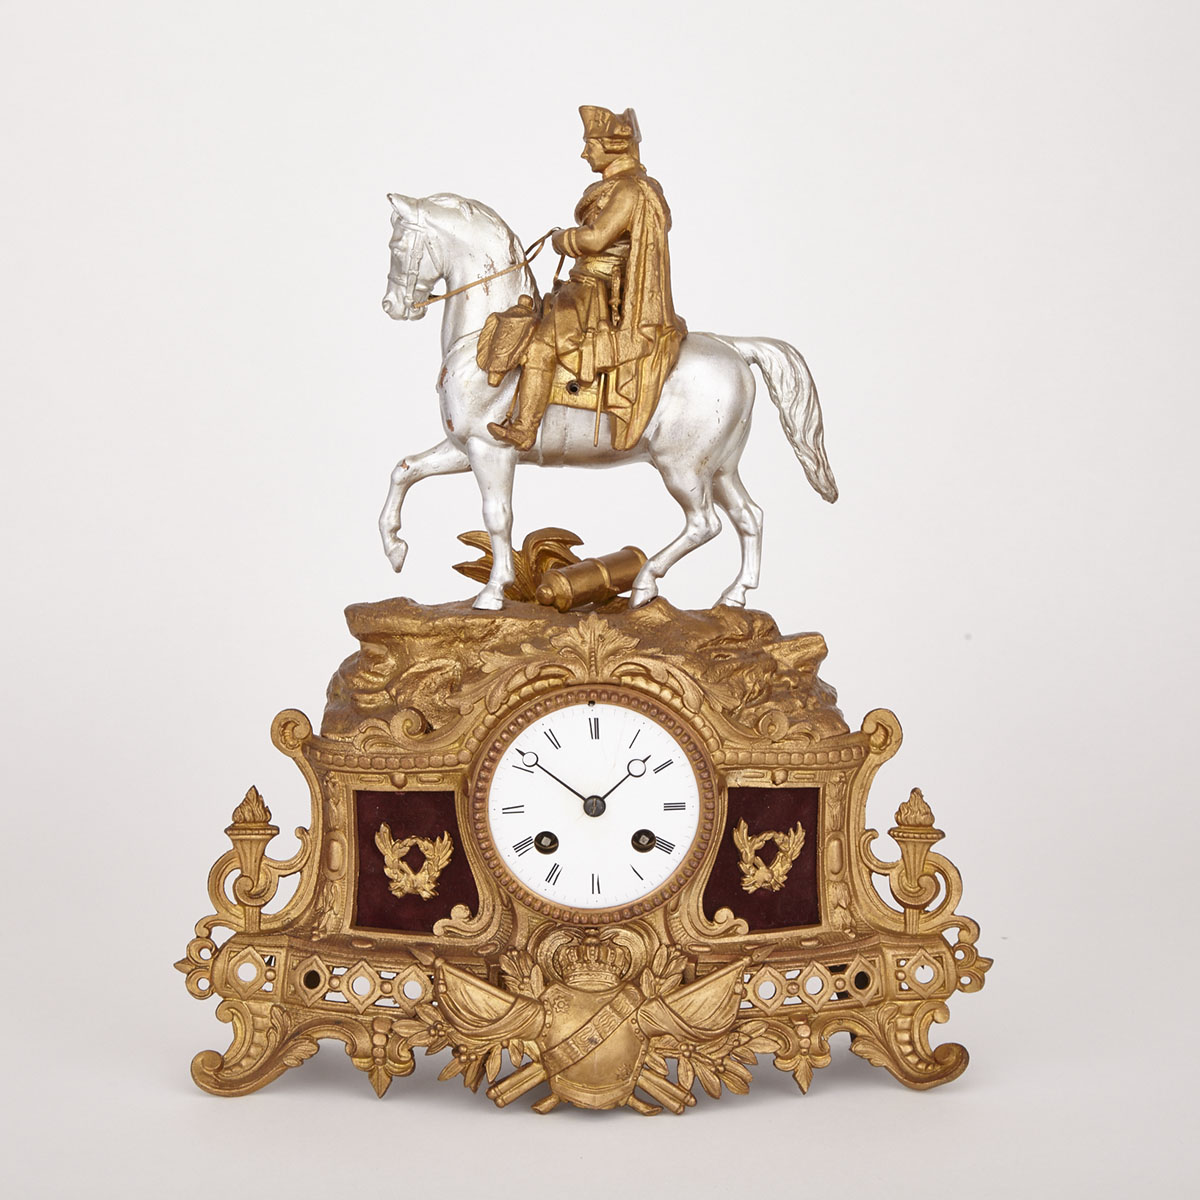 French Gilt and Silvered Metal Mantel Clock, 19th century